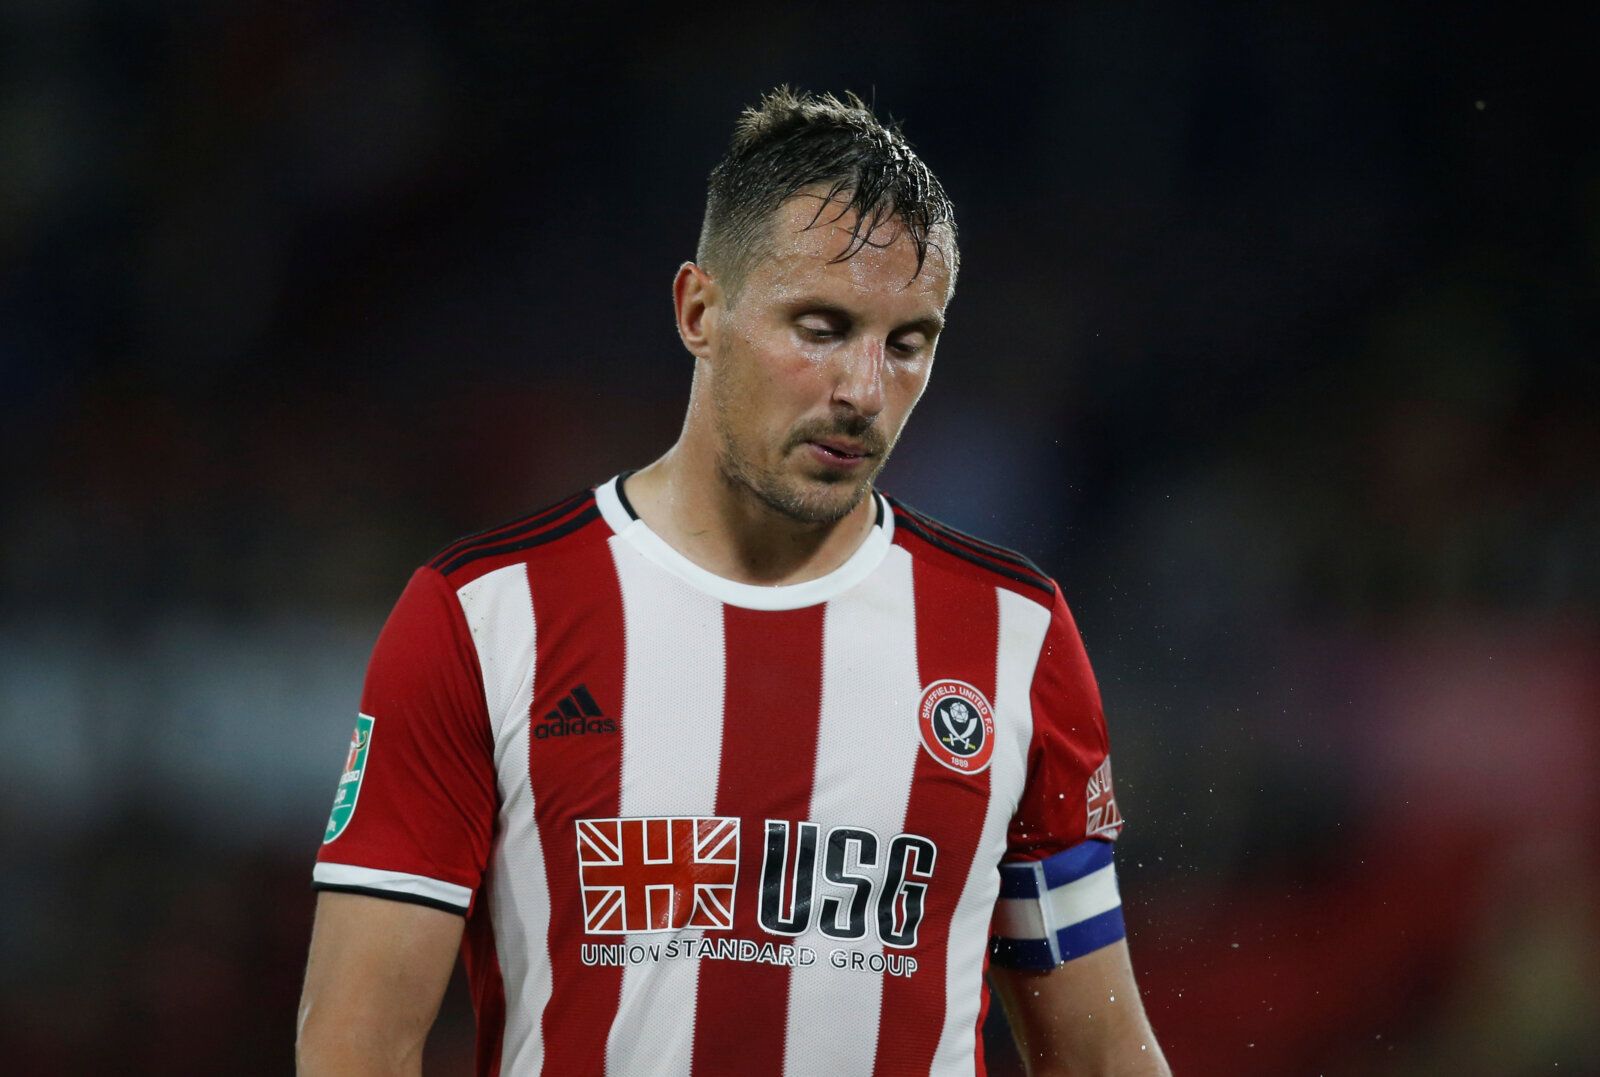 Soccer Football - Carabao Cup - Third Round - Sheffield United v Sunderland - Bramall Lane, Sheffield, Britain - September 25, 2019  Sheffield United's Phil Jagielka reacts after the match           Action Images via Reuters/Ed Sykes  EDITORIAL USE ONLY. No use with unauthorized audio, video, data, fixture lists, club/league logos or 